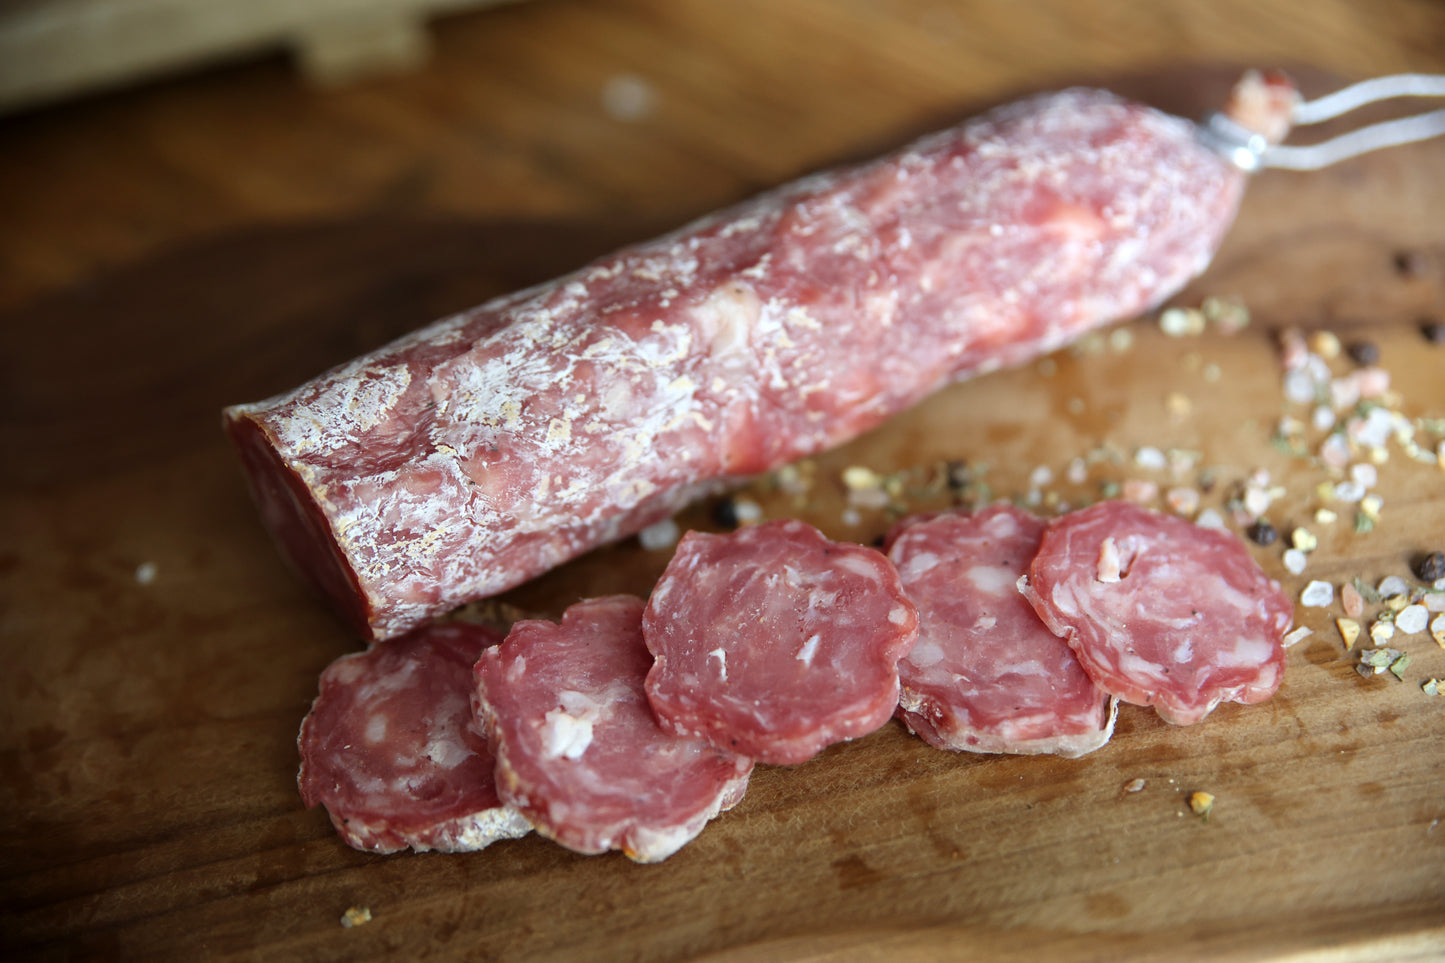 Fennel and Garlic Salchichon Whole Salami Approx 320g random weight packet. Regular price $8.00 AUD [You are guaranteed to receive at least 300g of product, equivalent price of $33.33 per kg.]